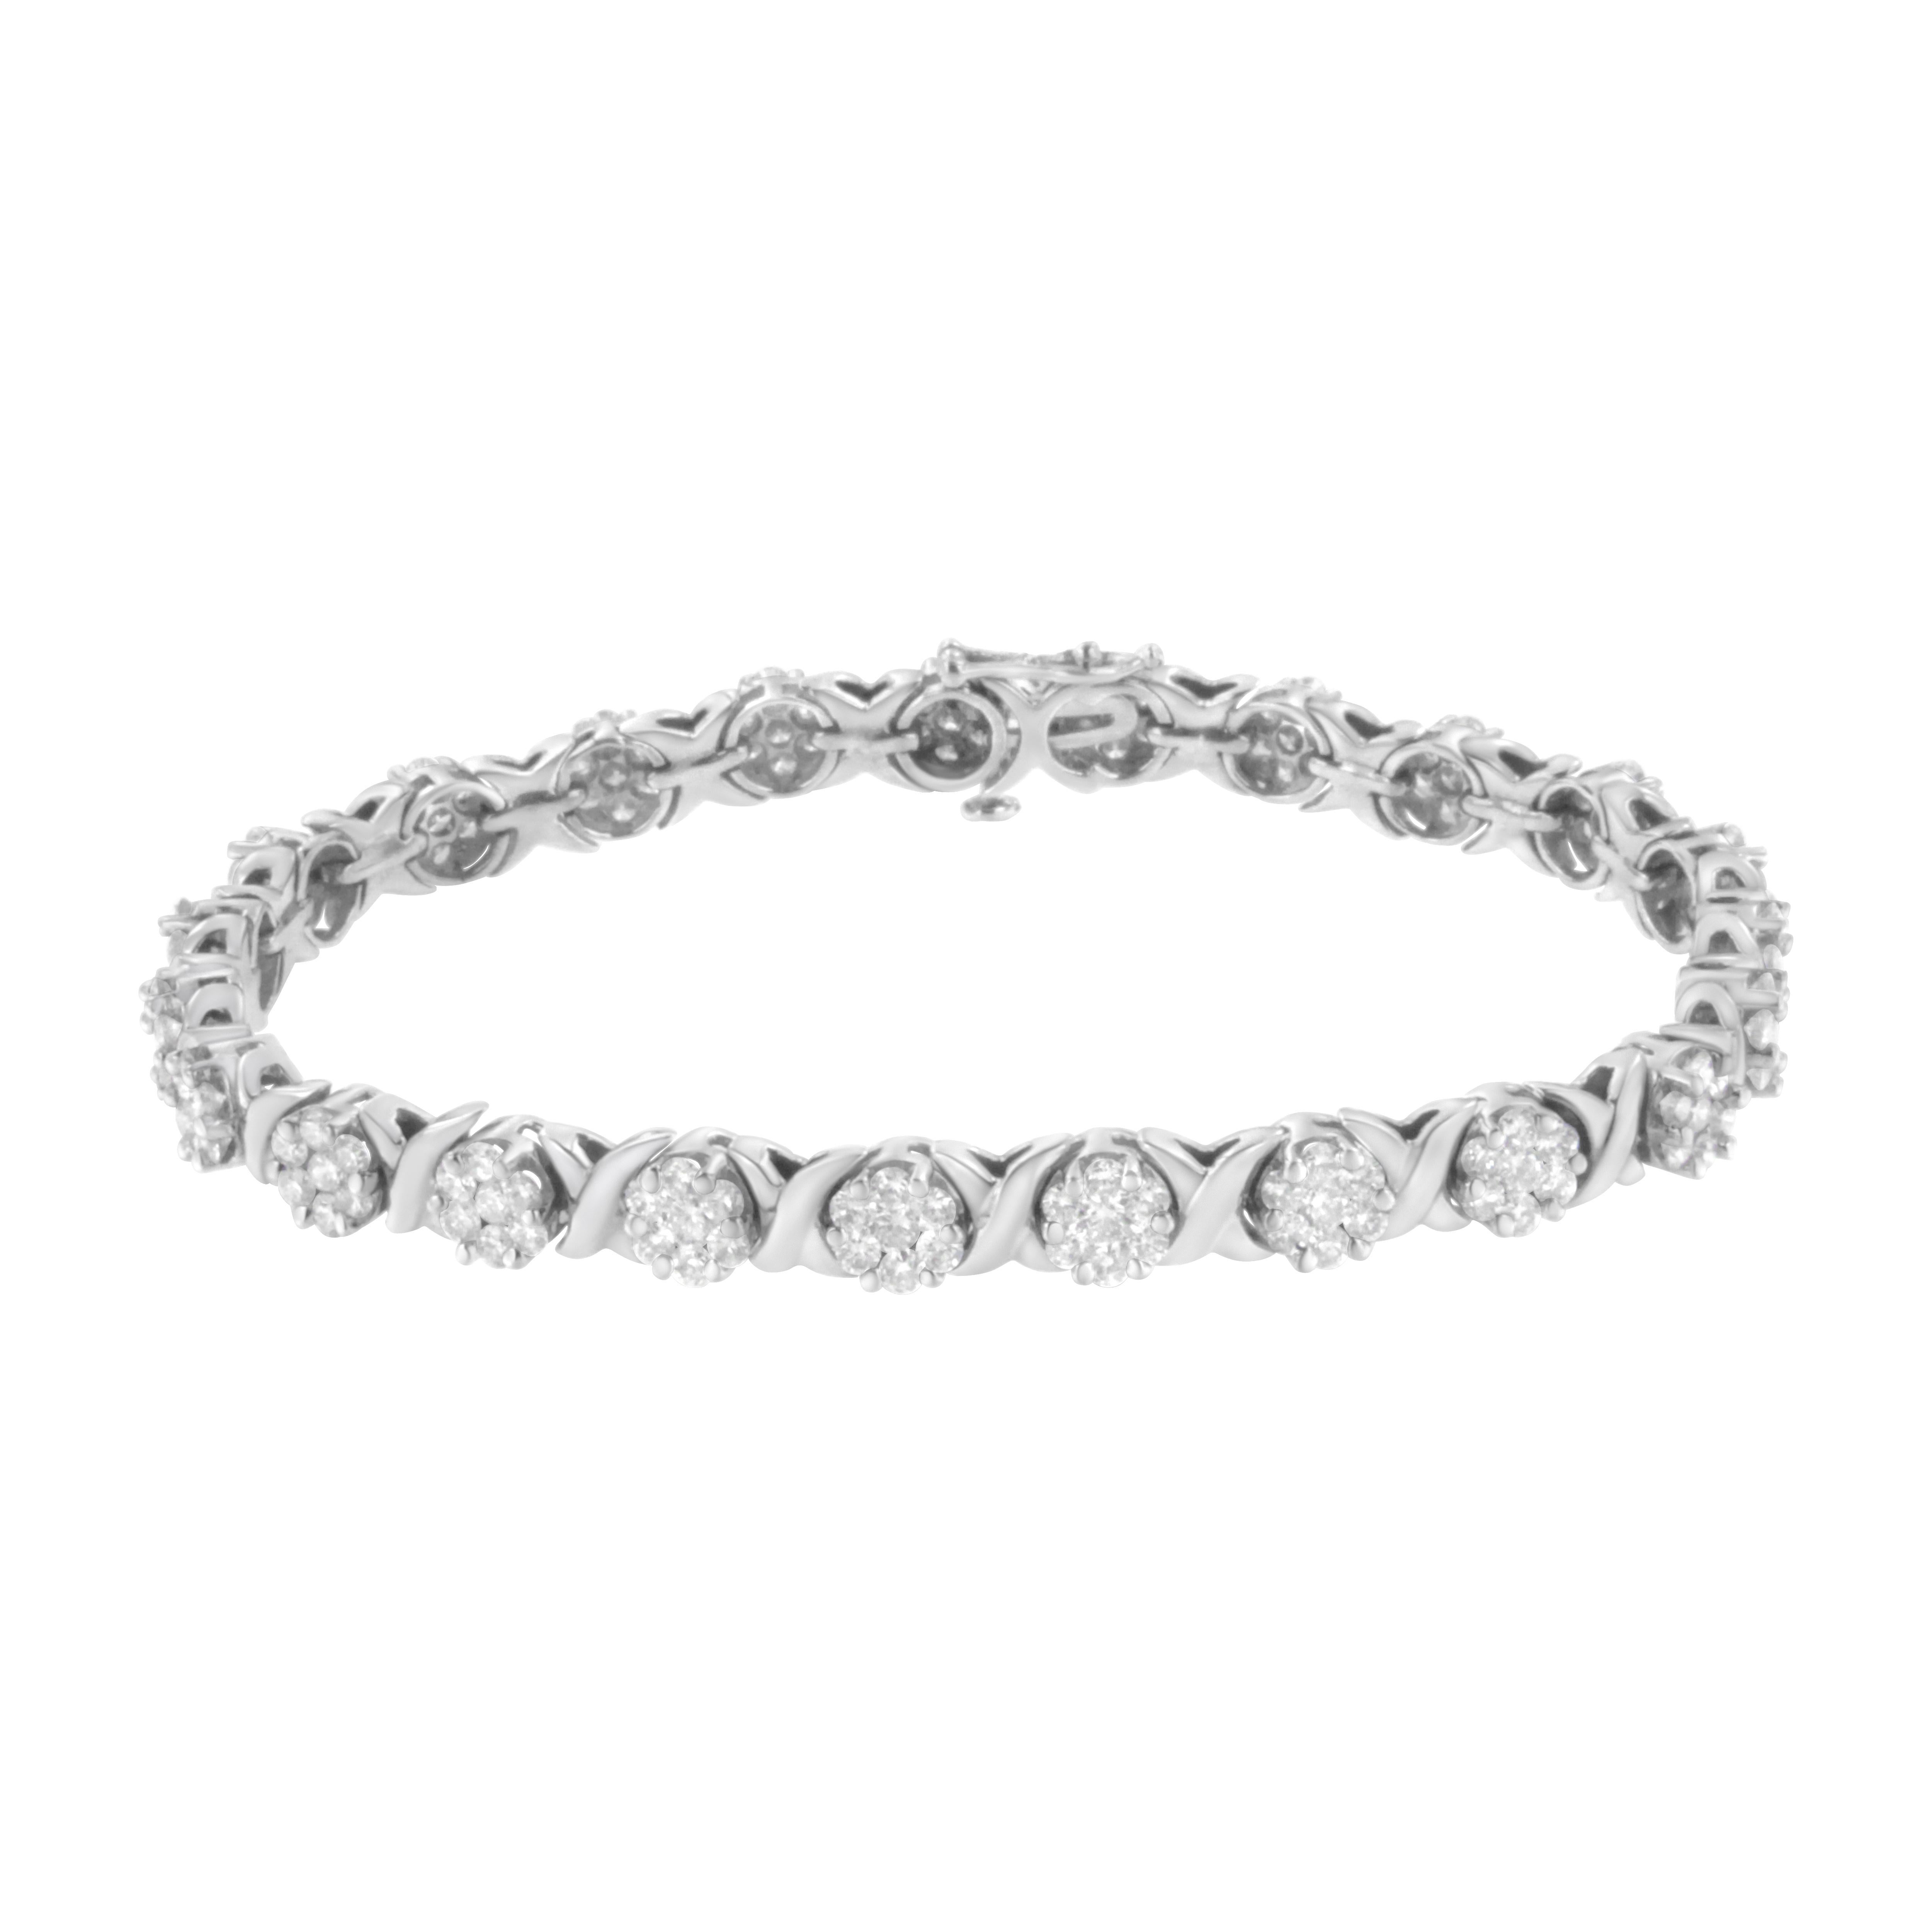 Embellish your wrist with this elegant 4 7/8ct TDW diamond link bracelet. Each X link is crafted from cool 14kt white gold and alternates with a floral diamond cluster in this gorgeous design. 161 round cut diamonds sparkle in this 14k white gold